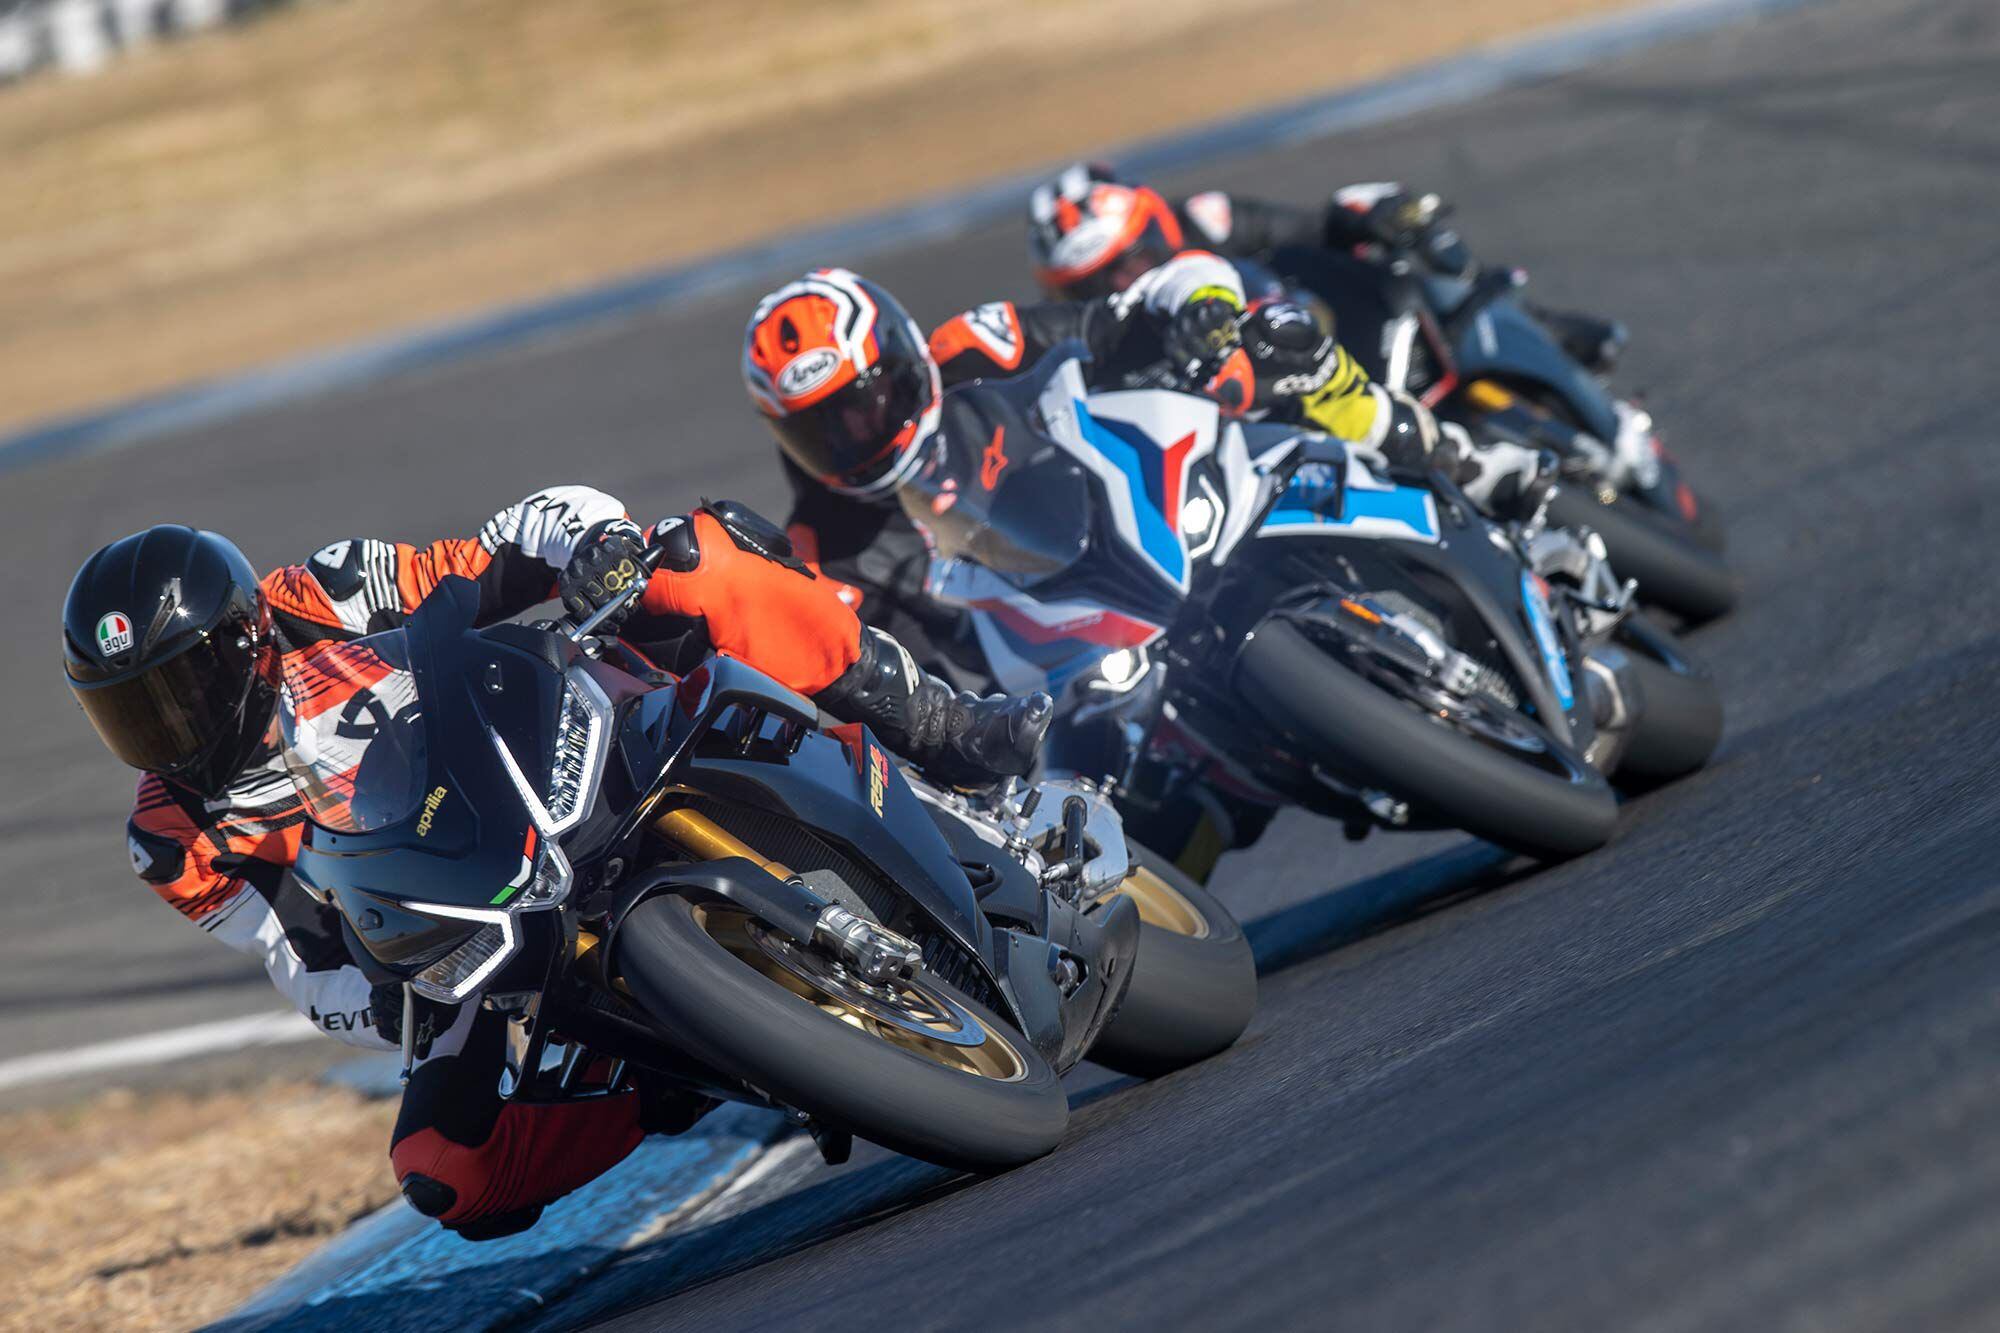 The Aprilia RSV4 Factory won the last <i>Cycle World</i> Superbike Shootout, but slow development means it is getting a strong challenge from its competitors.